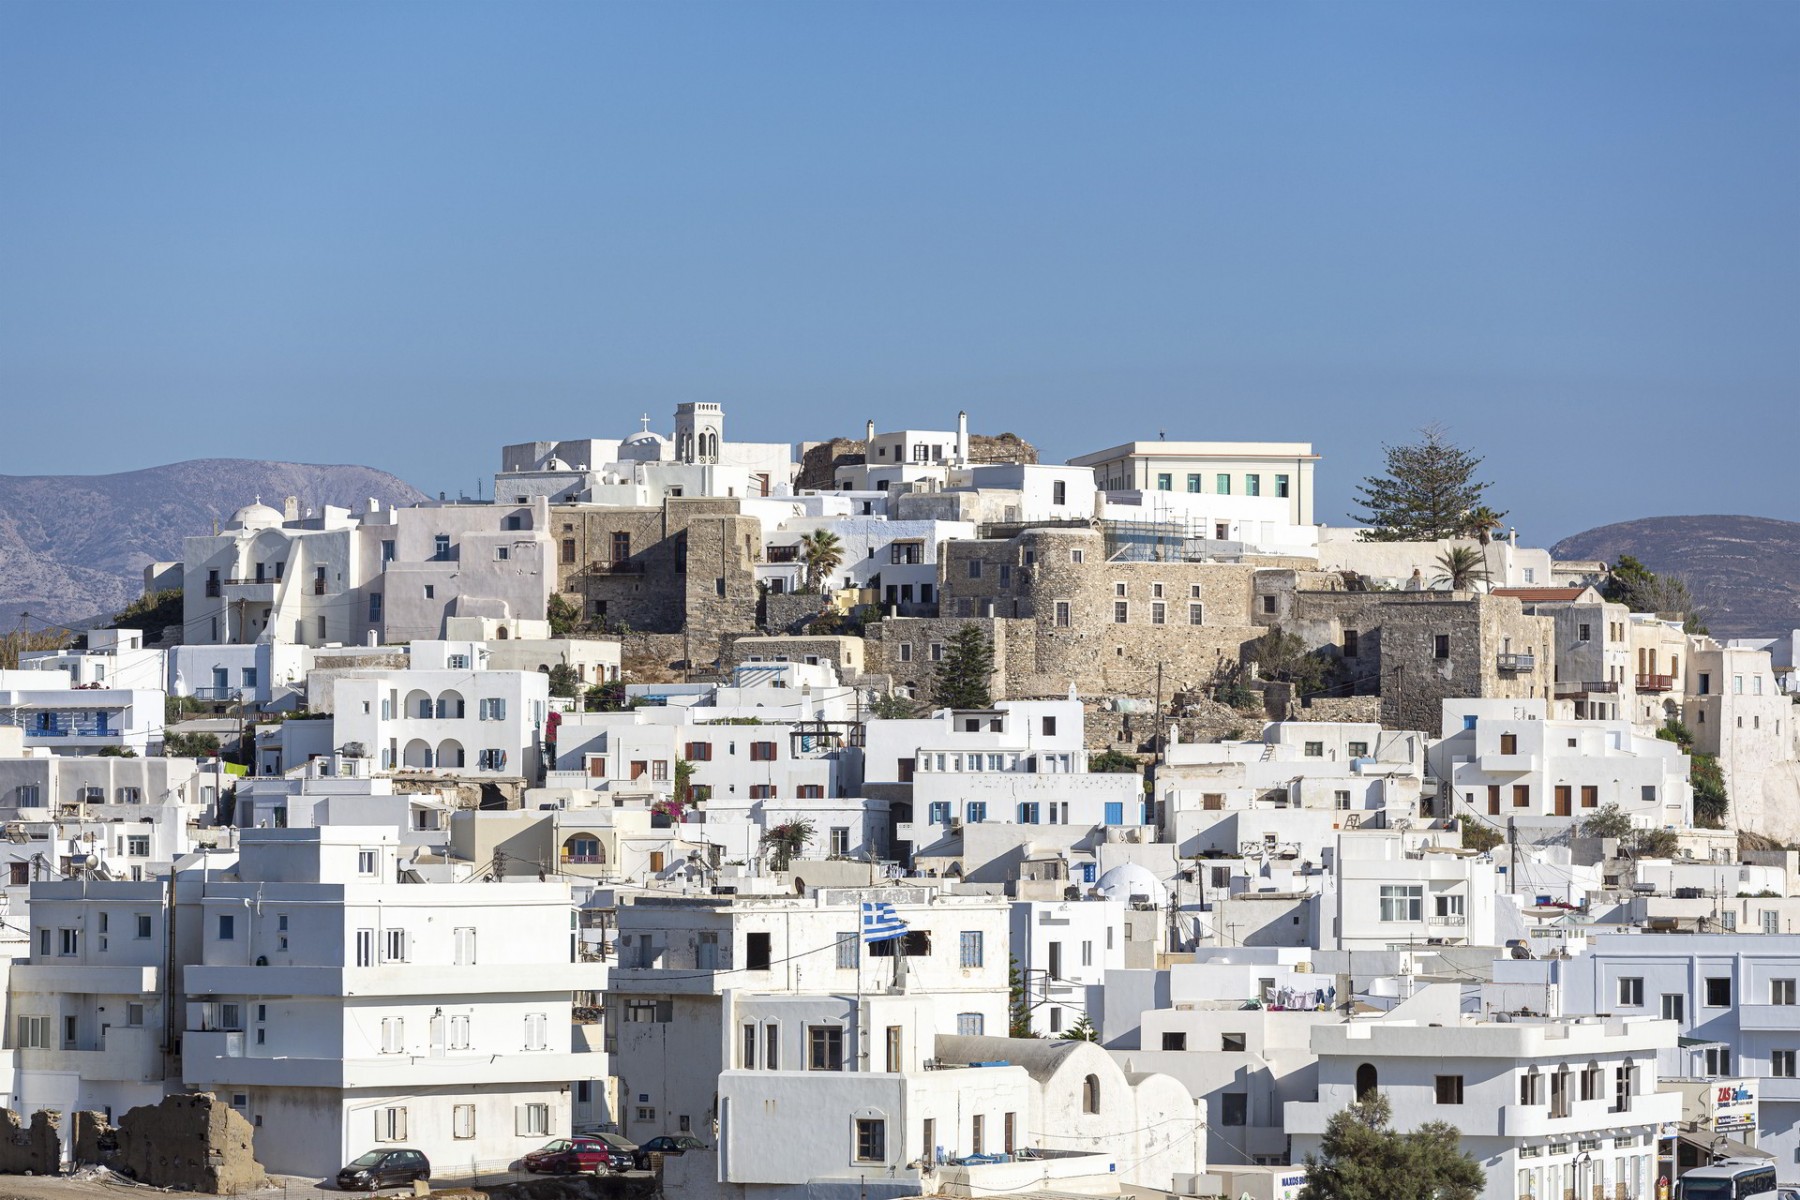 Naxos Town with the Venetian Castle